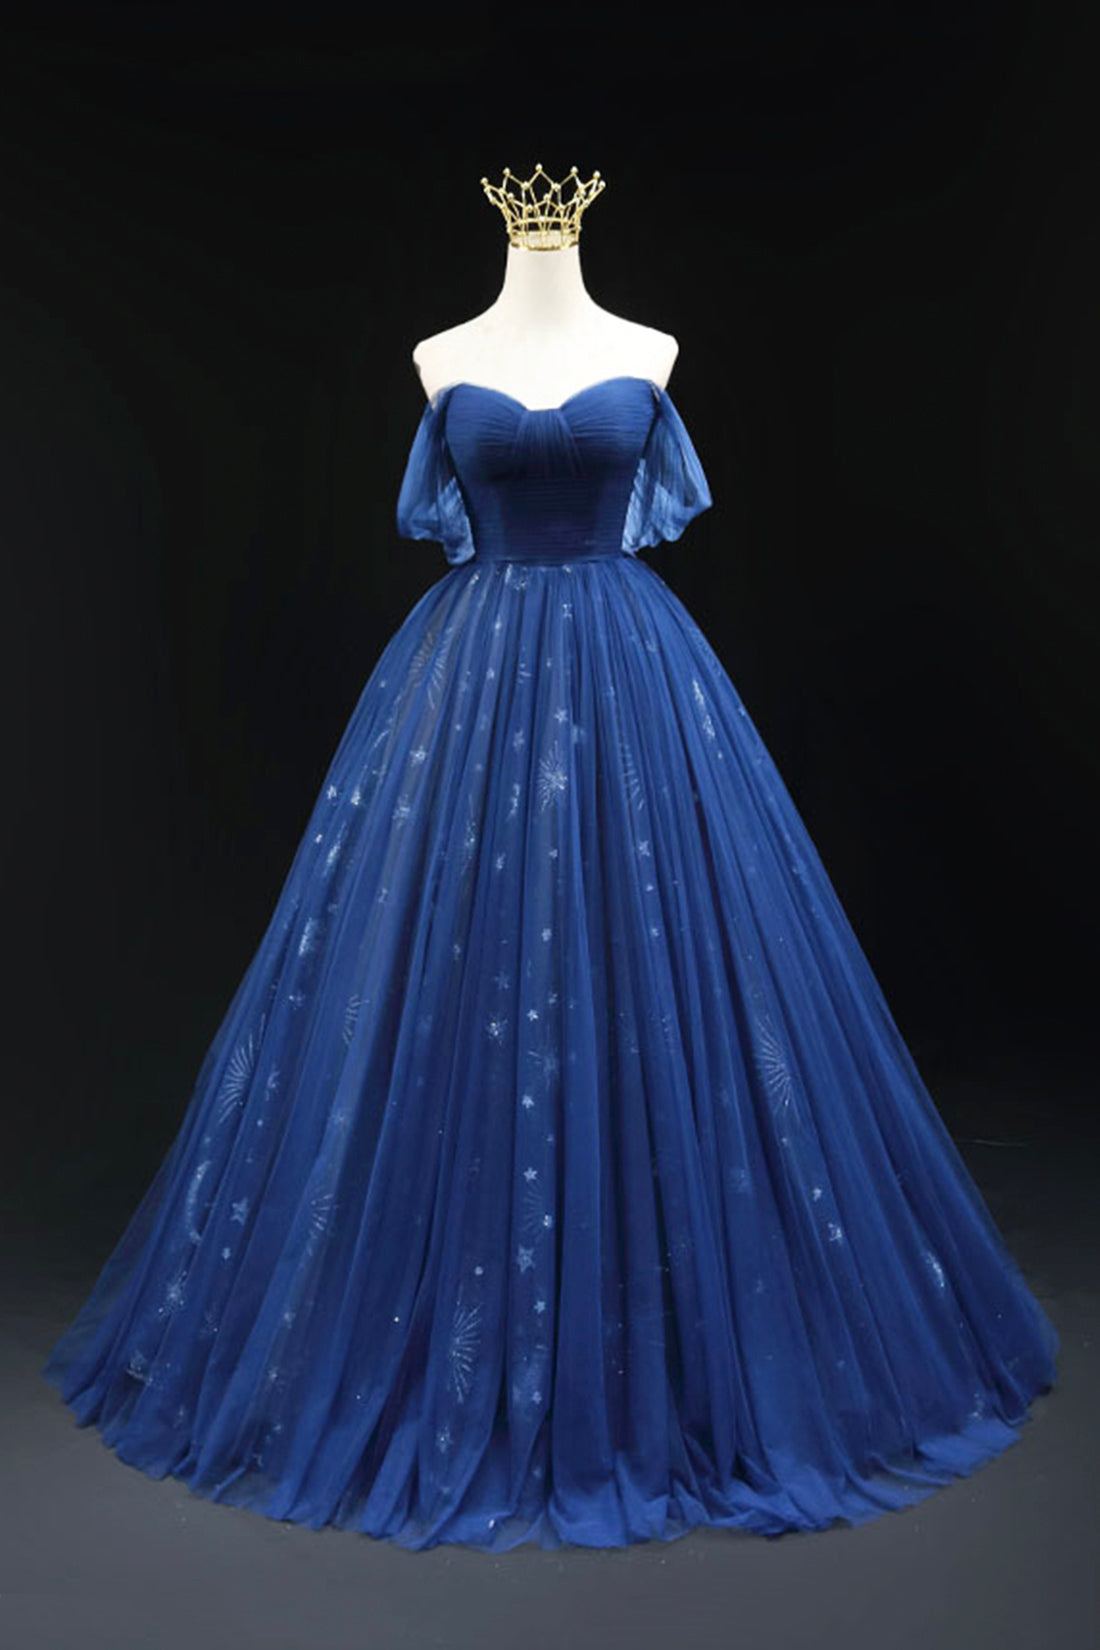 Beautiful Navy Blue Tulle Long Prom Dress, Off the Shoulder A-Line Backless Formal Dress